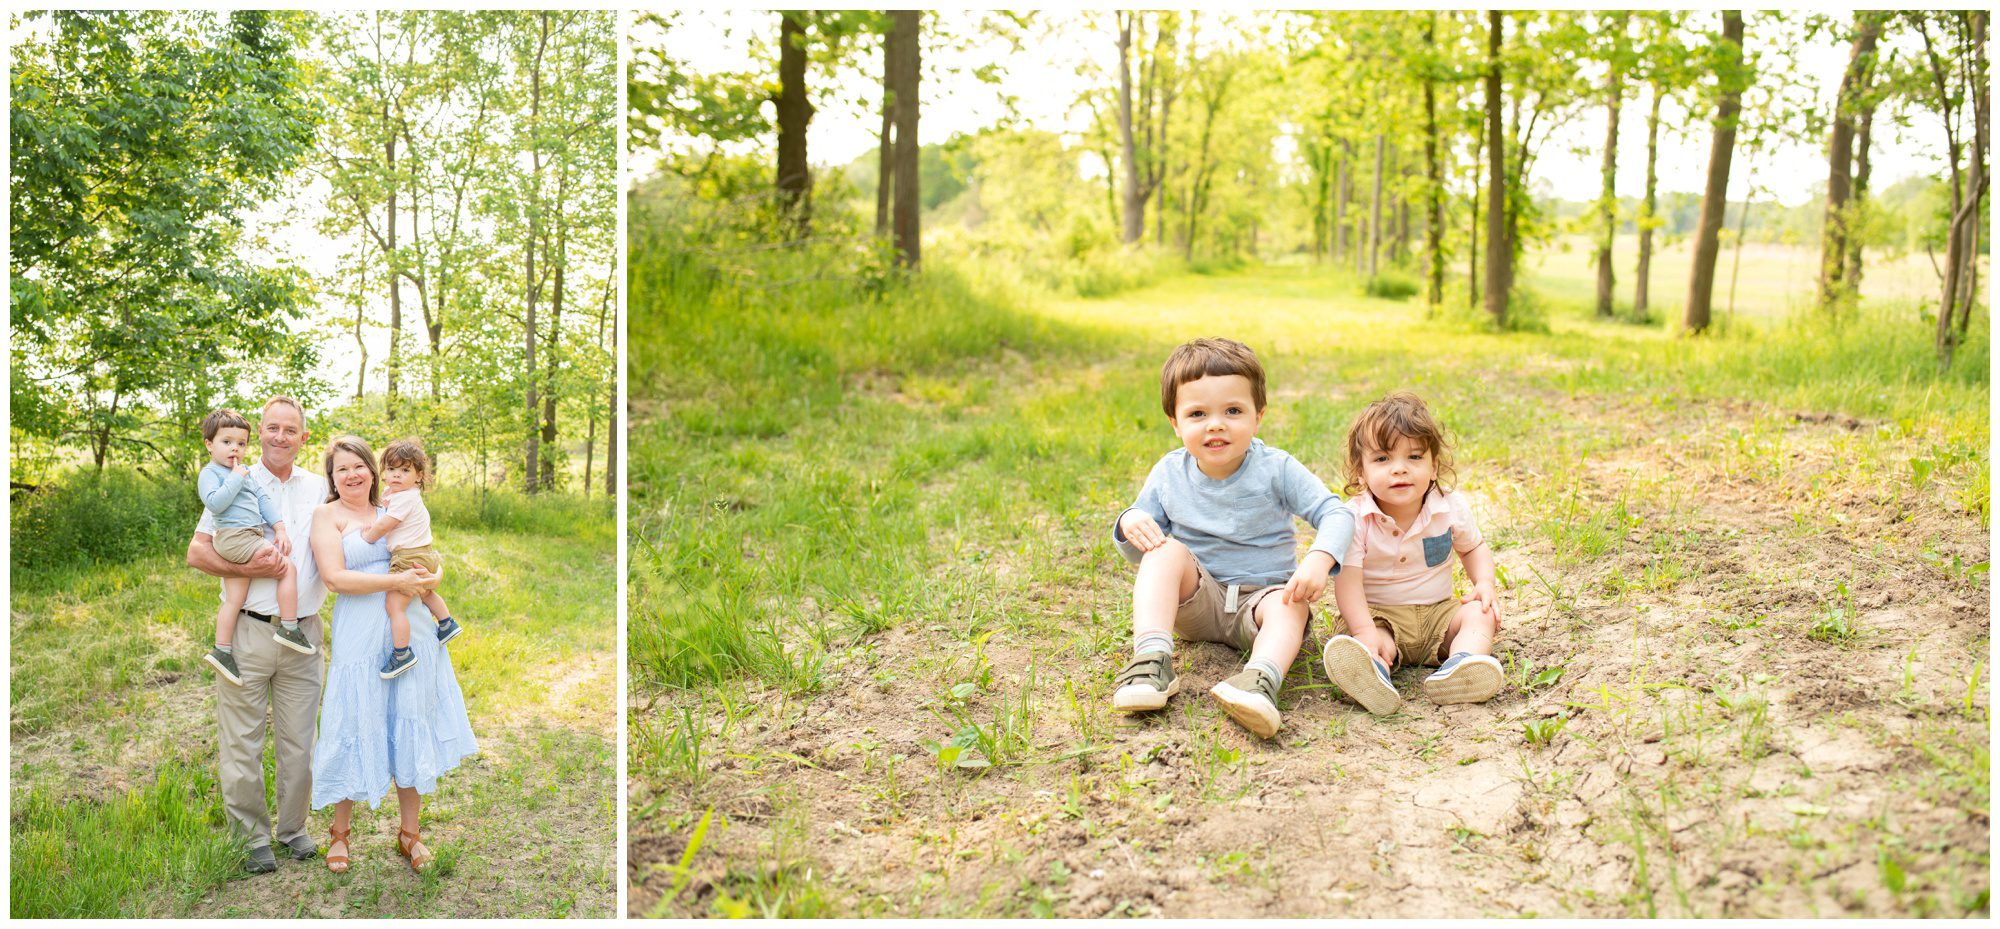 Mount Brydges Family Photography, Mount Brydges Ontario Photographers, Michelle A Photography